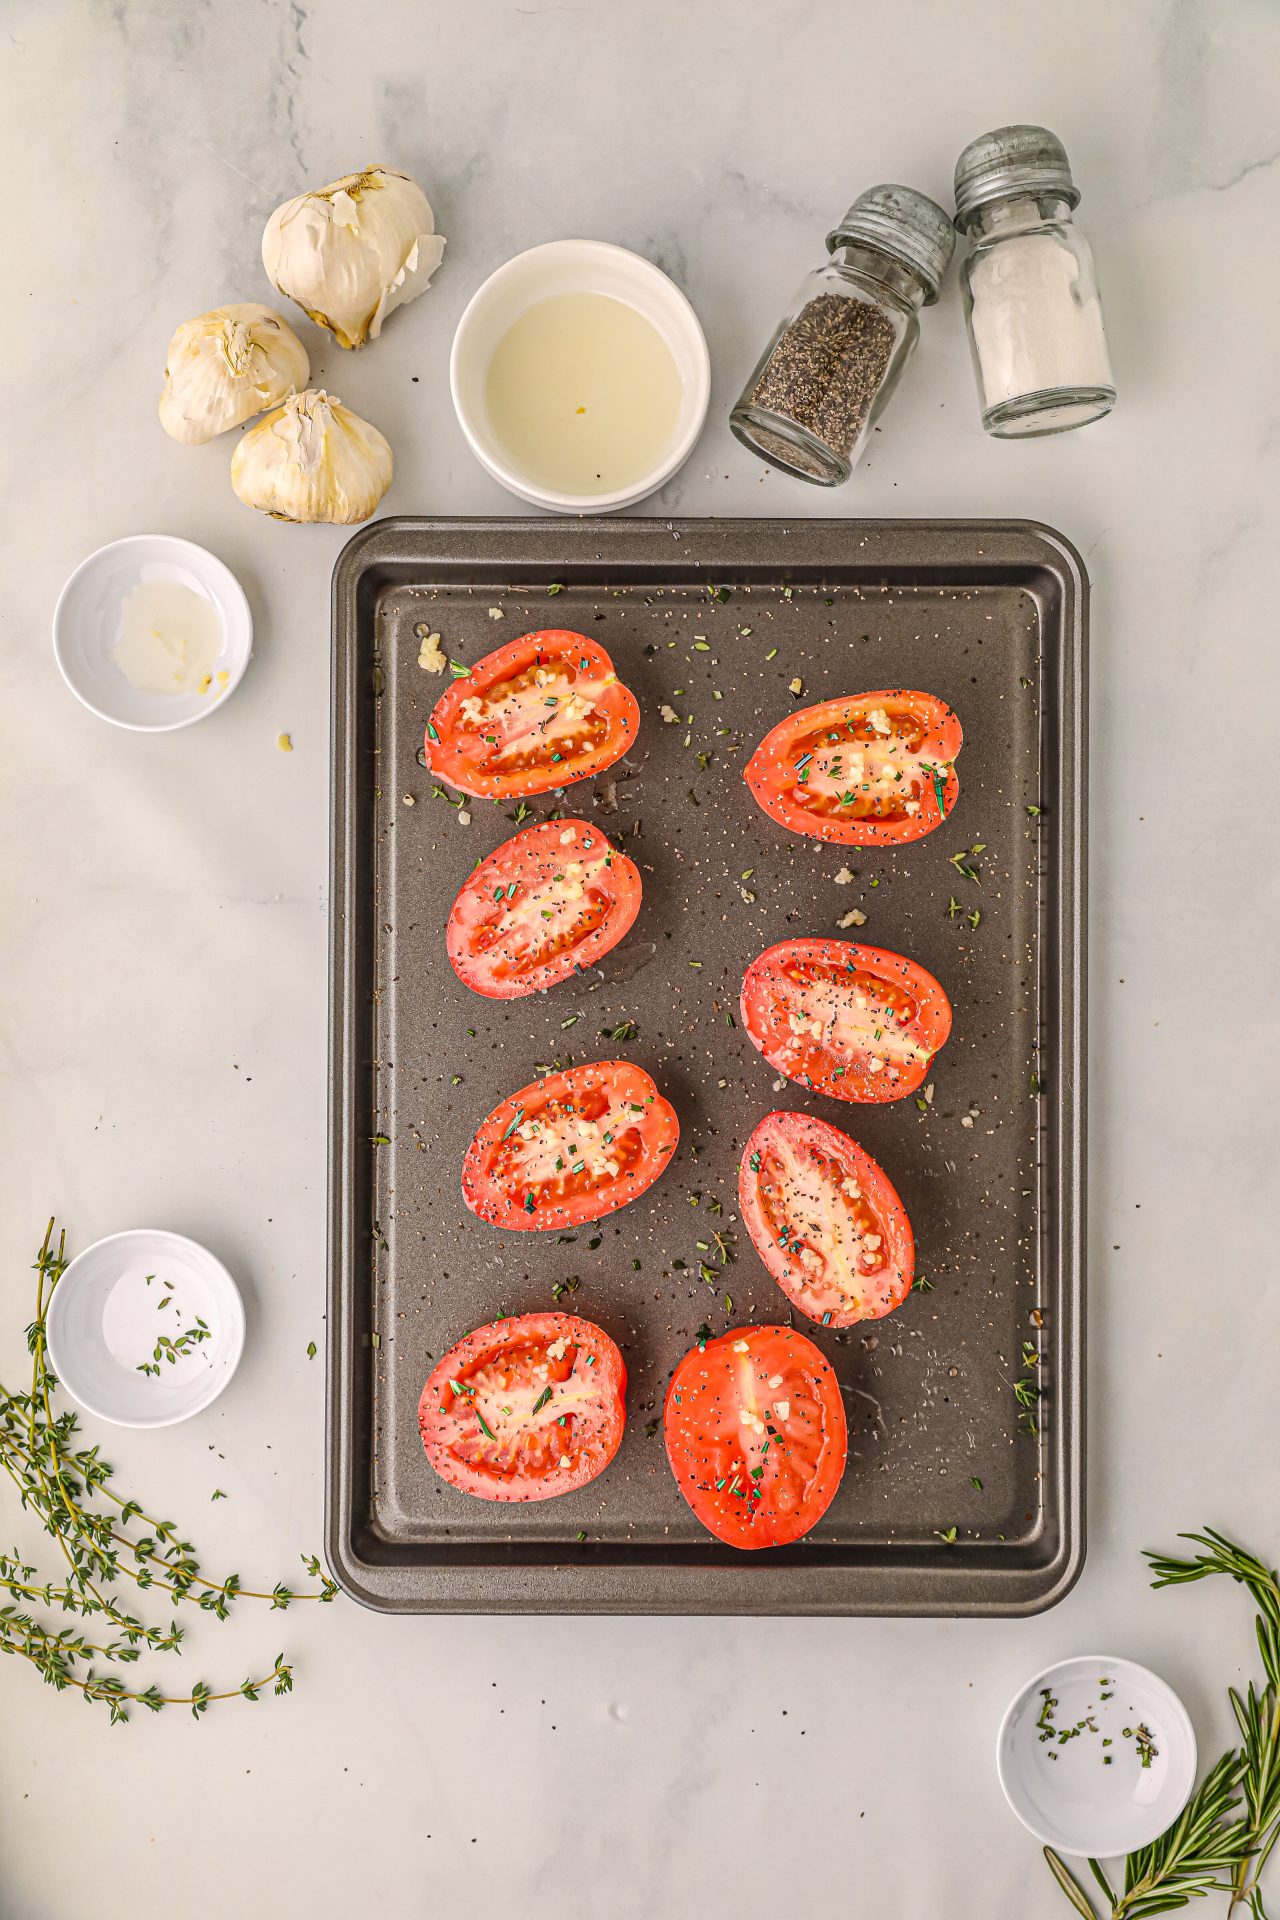 Sliced tomatoes on a baking sheet being drizzled with olive oil and seasonings